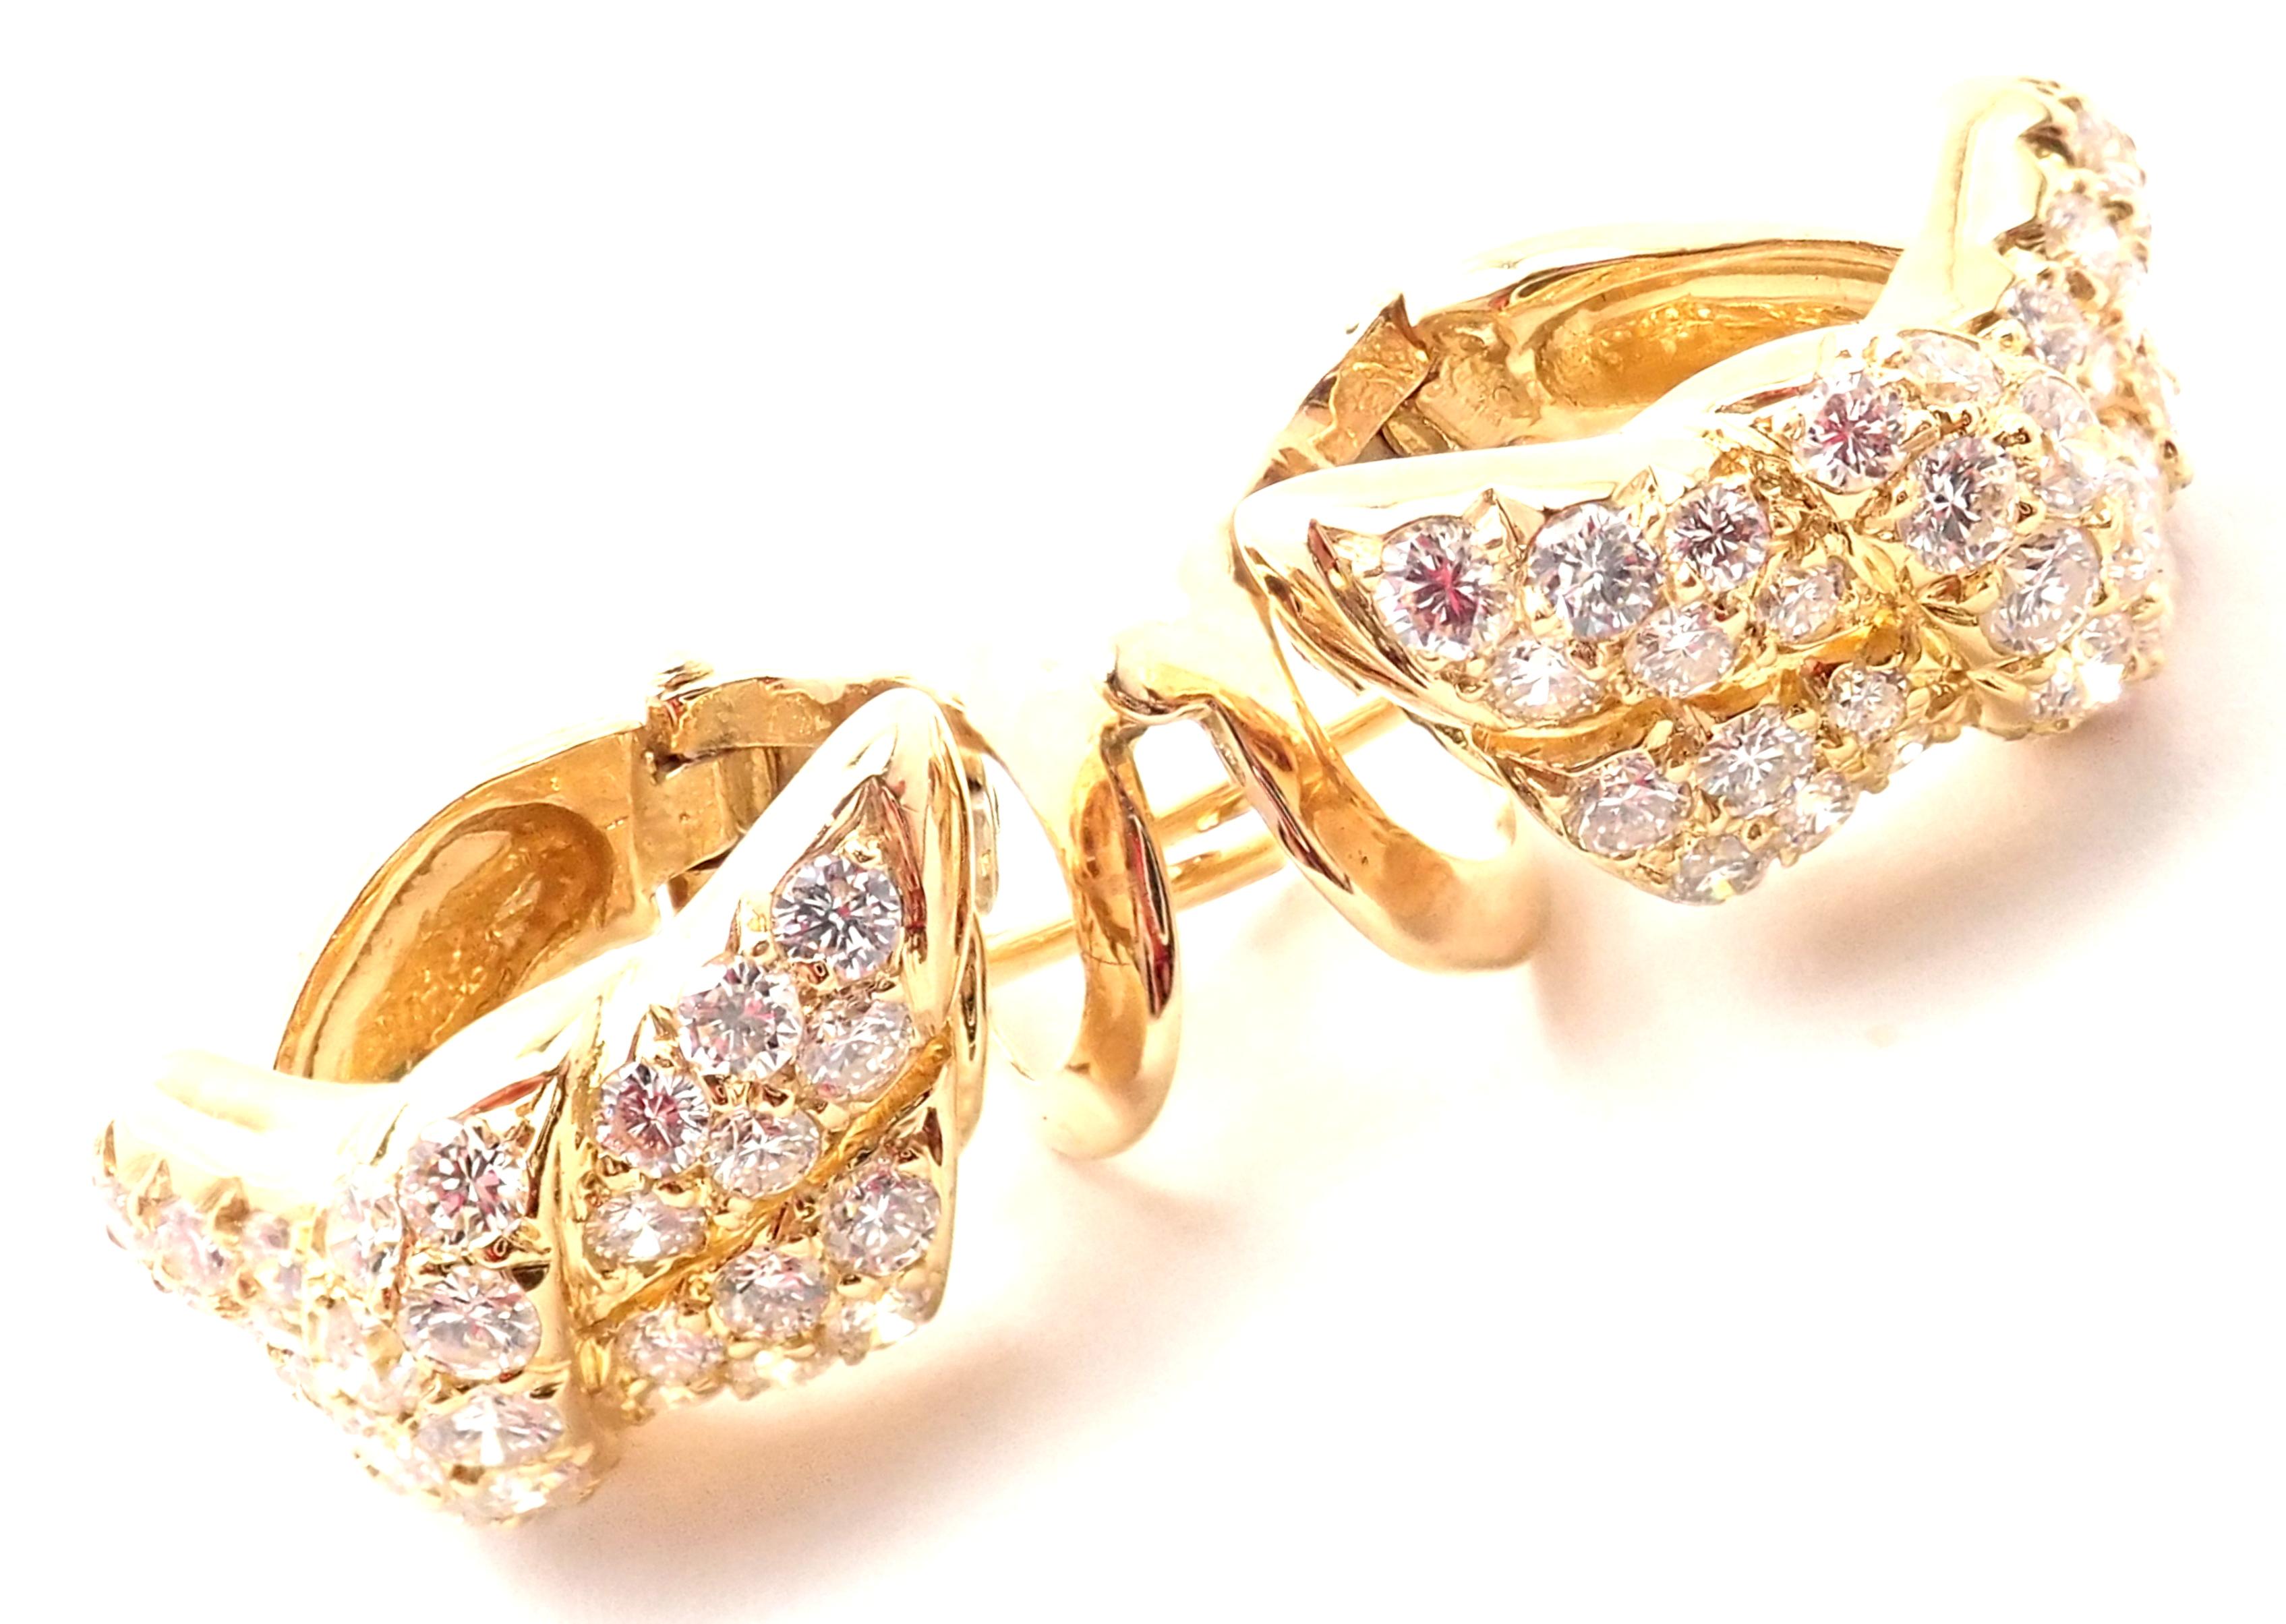 Van Cleef & Arpels Diamond Bow Yellow Gold Earrings For Sale 6